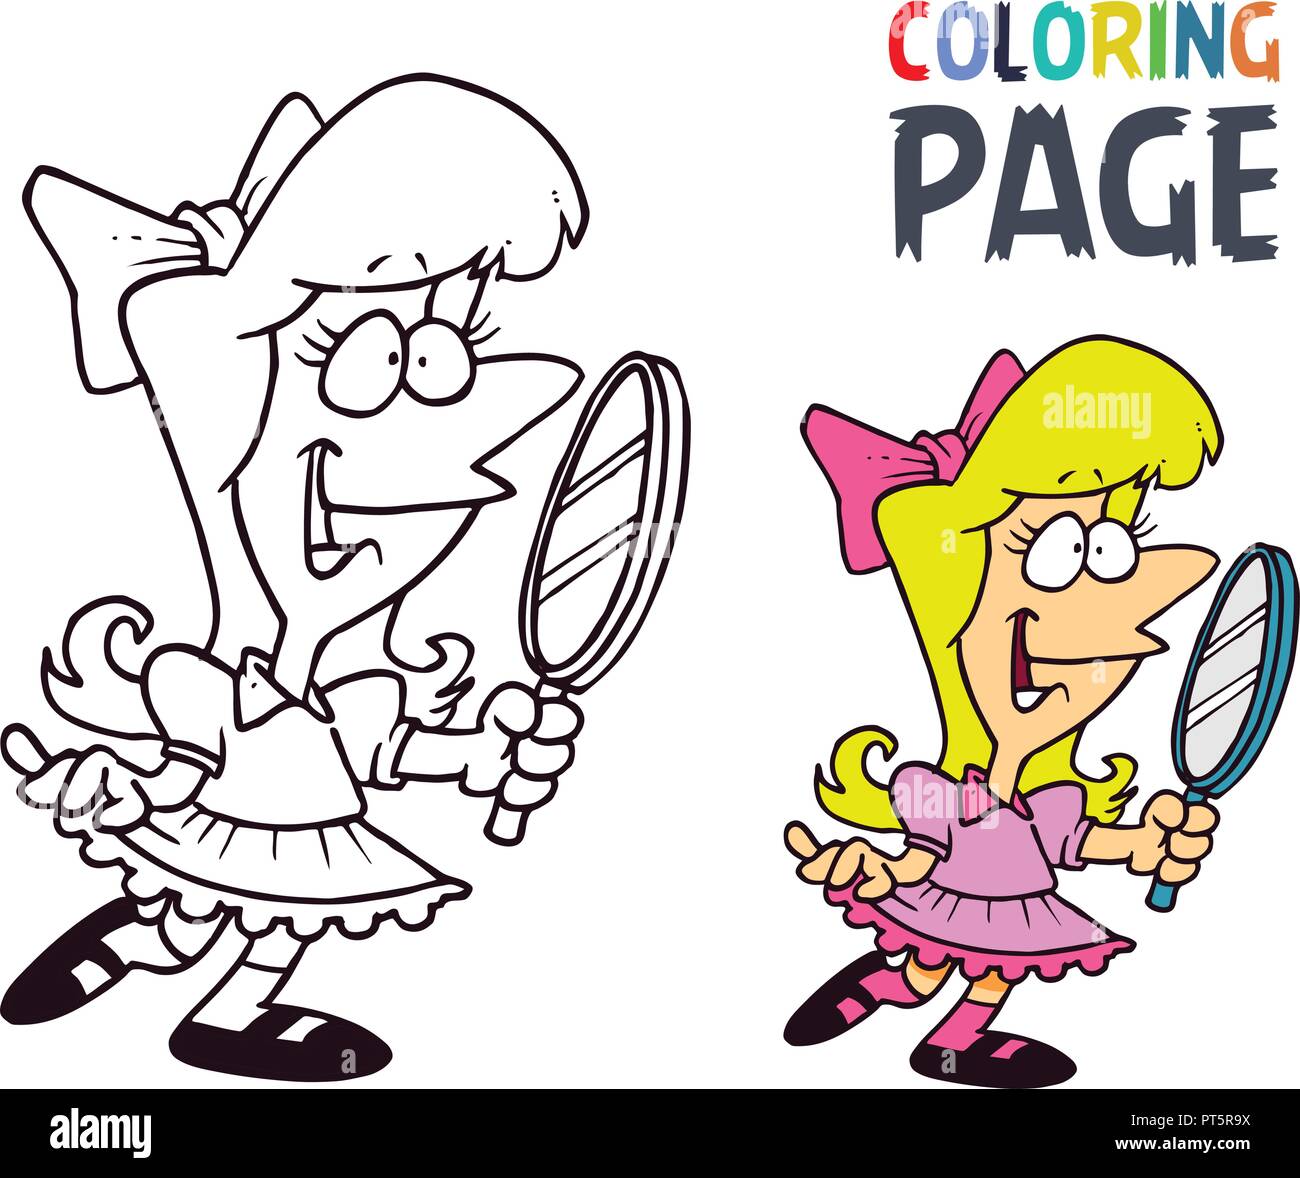 young girl with mirror cartoon coloring page Stock Vector